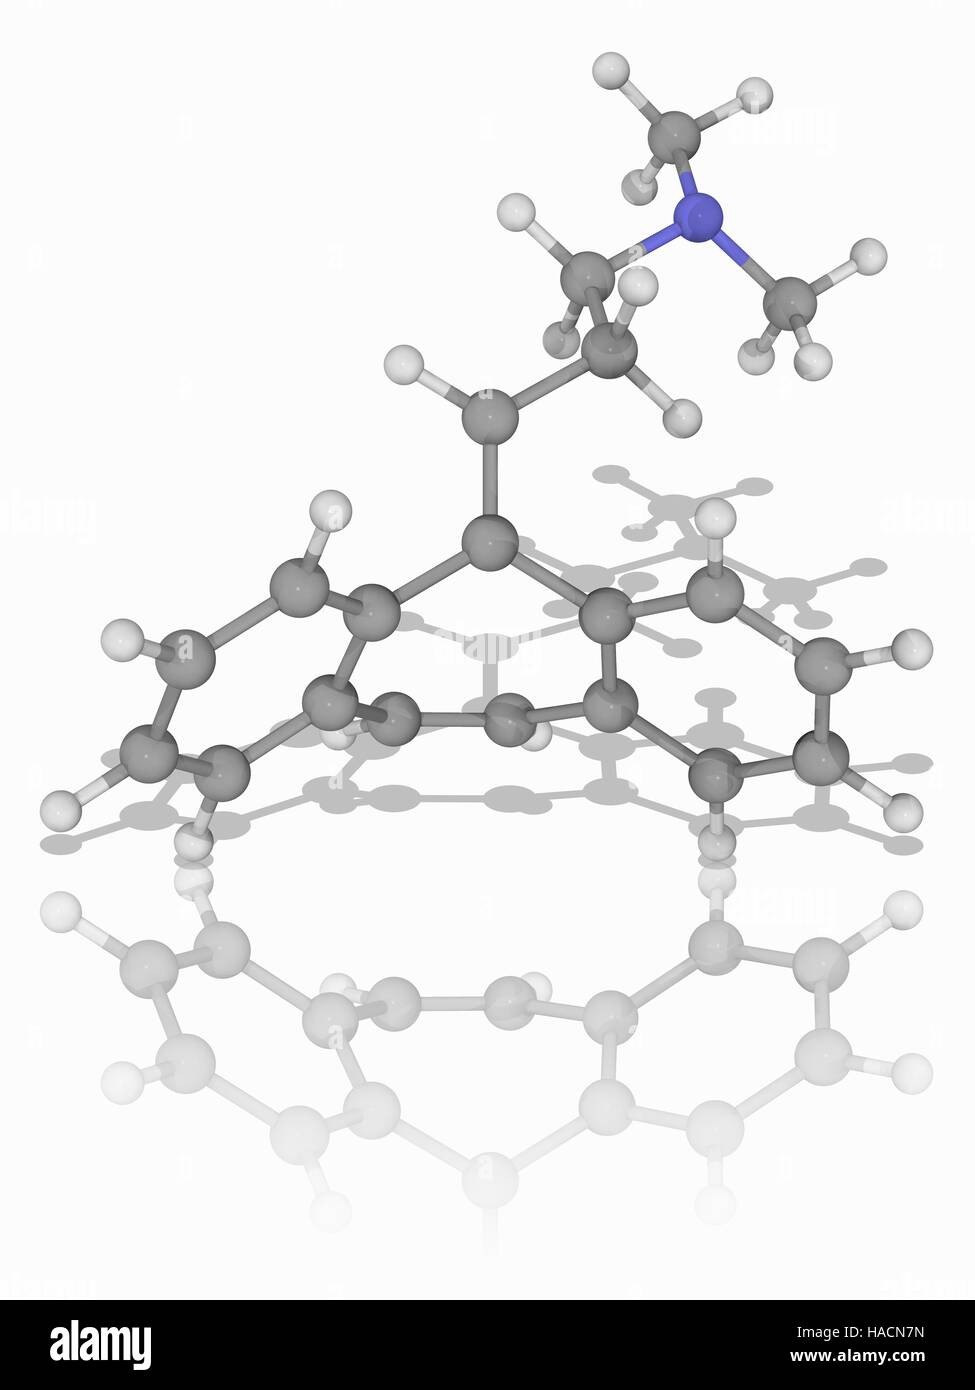 Cyclobenzaprine. Molecular model of the muscle relaxant drug cyclobenzaprine (C20.H21.N), used to treat skeletal muscle spasms. Atoms are represented as spheres and are colour-coded: carbon (grey), hydrogen (white) and nitrogen (blue). Illustration. Stock Photo